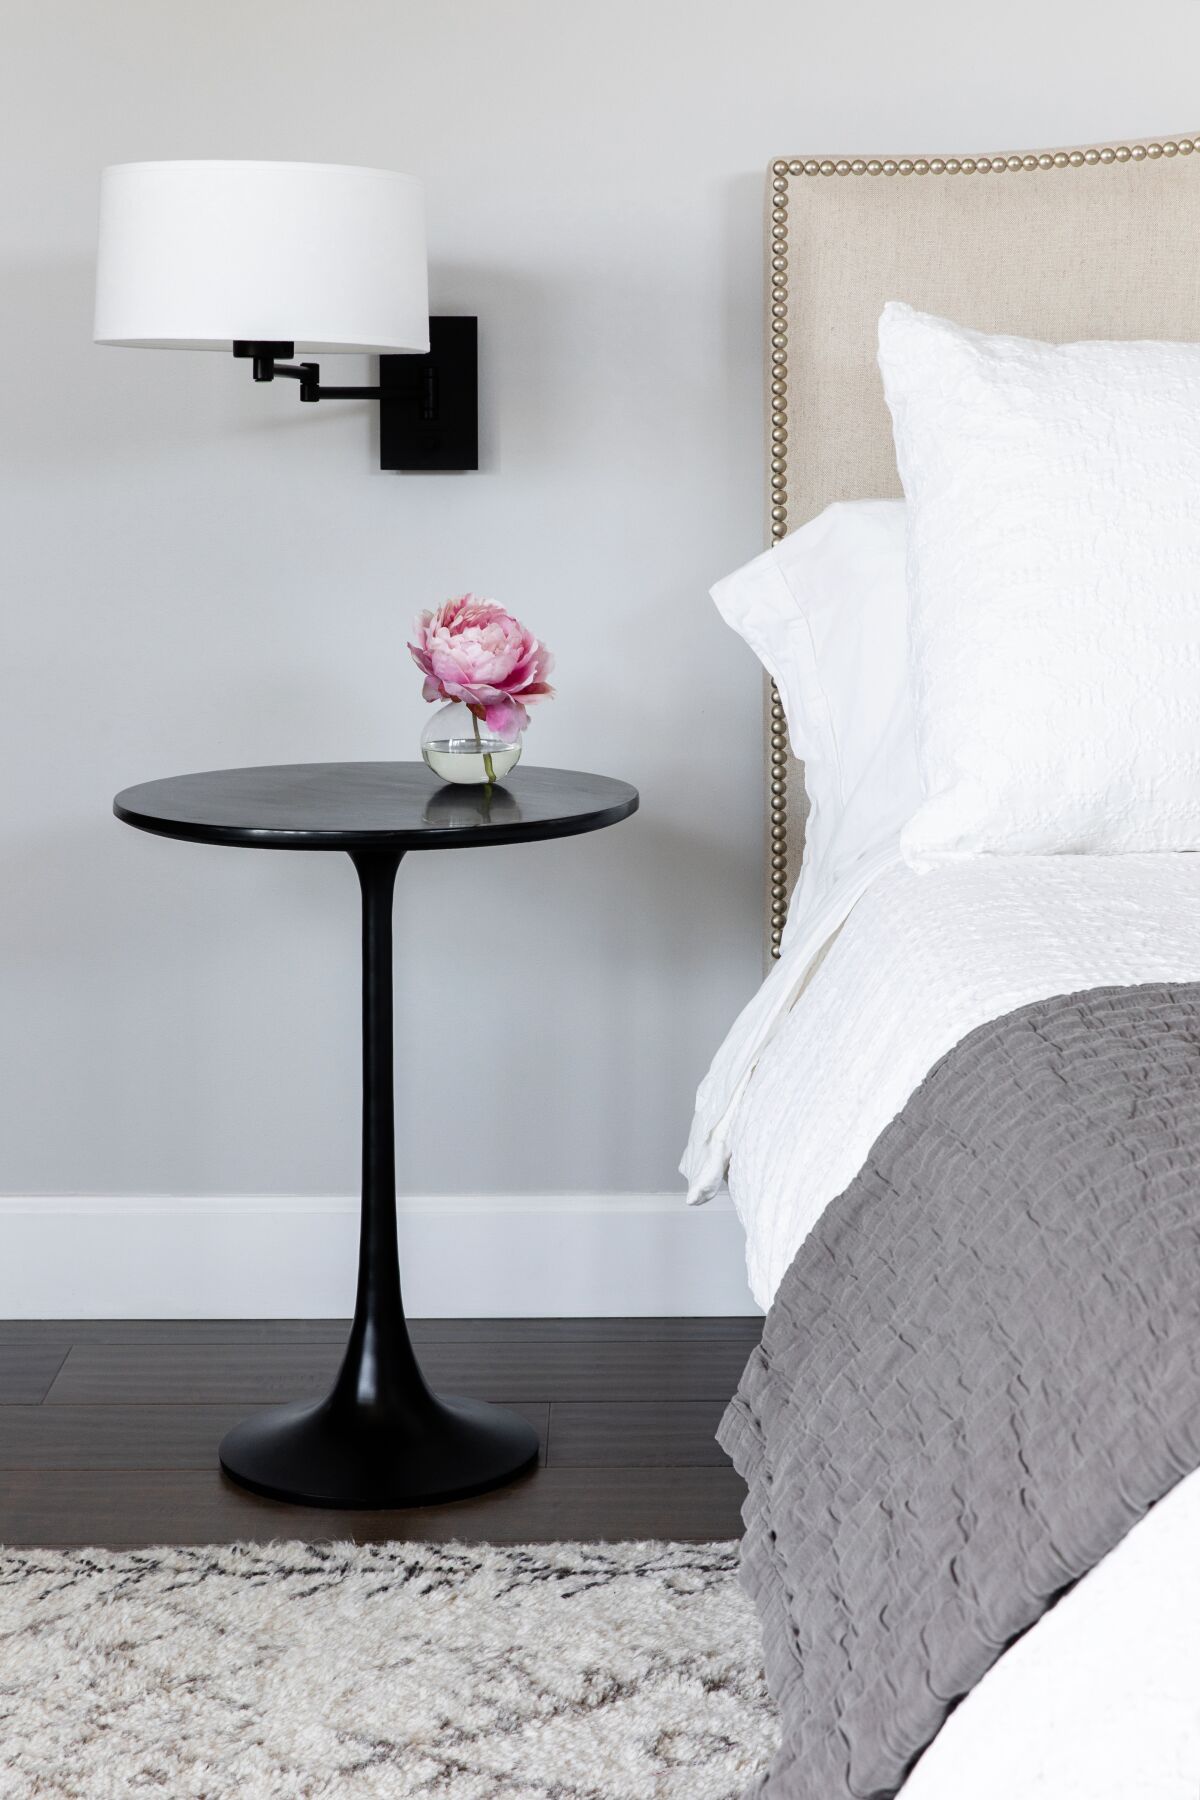 A little side table by the bed offers a space for simple pleasures: a small vase, or a cup of tea.